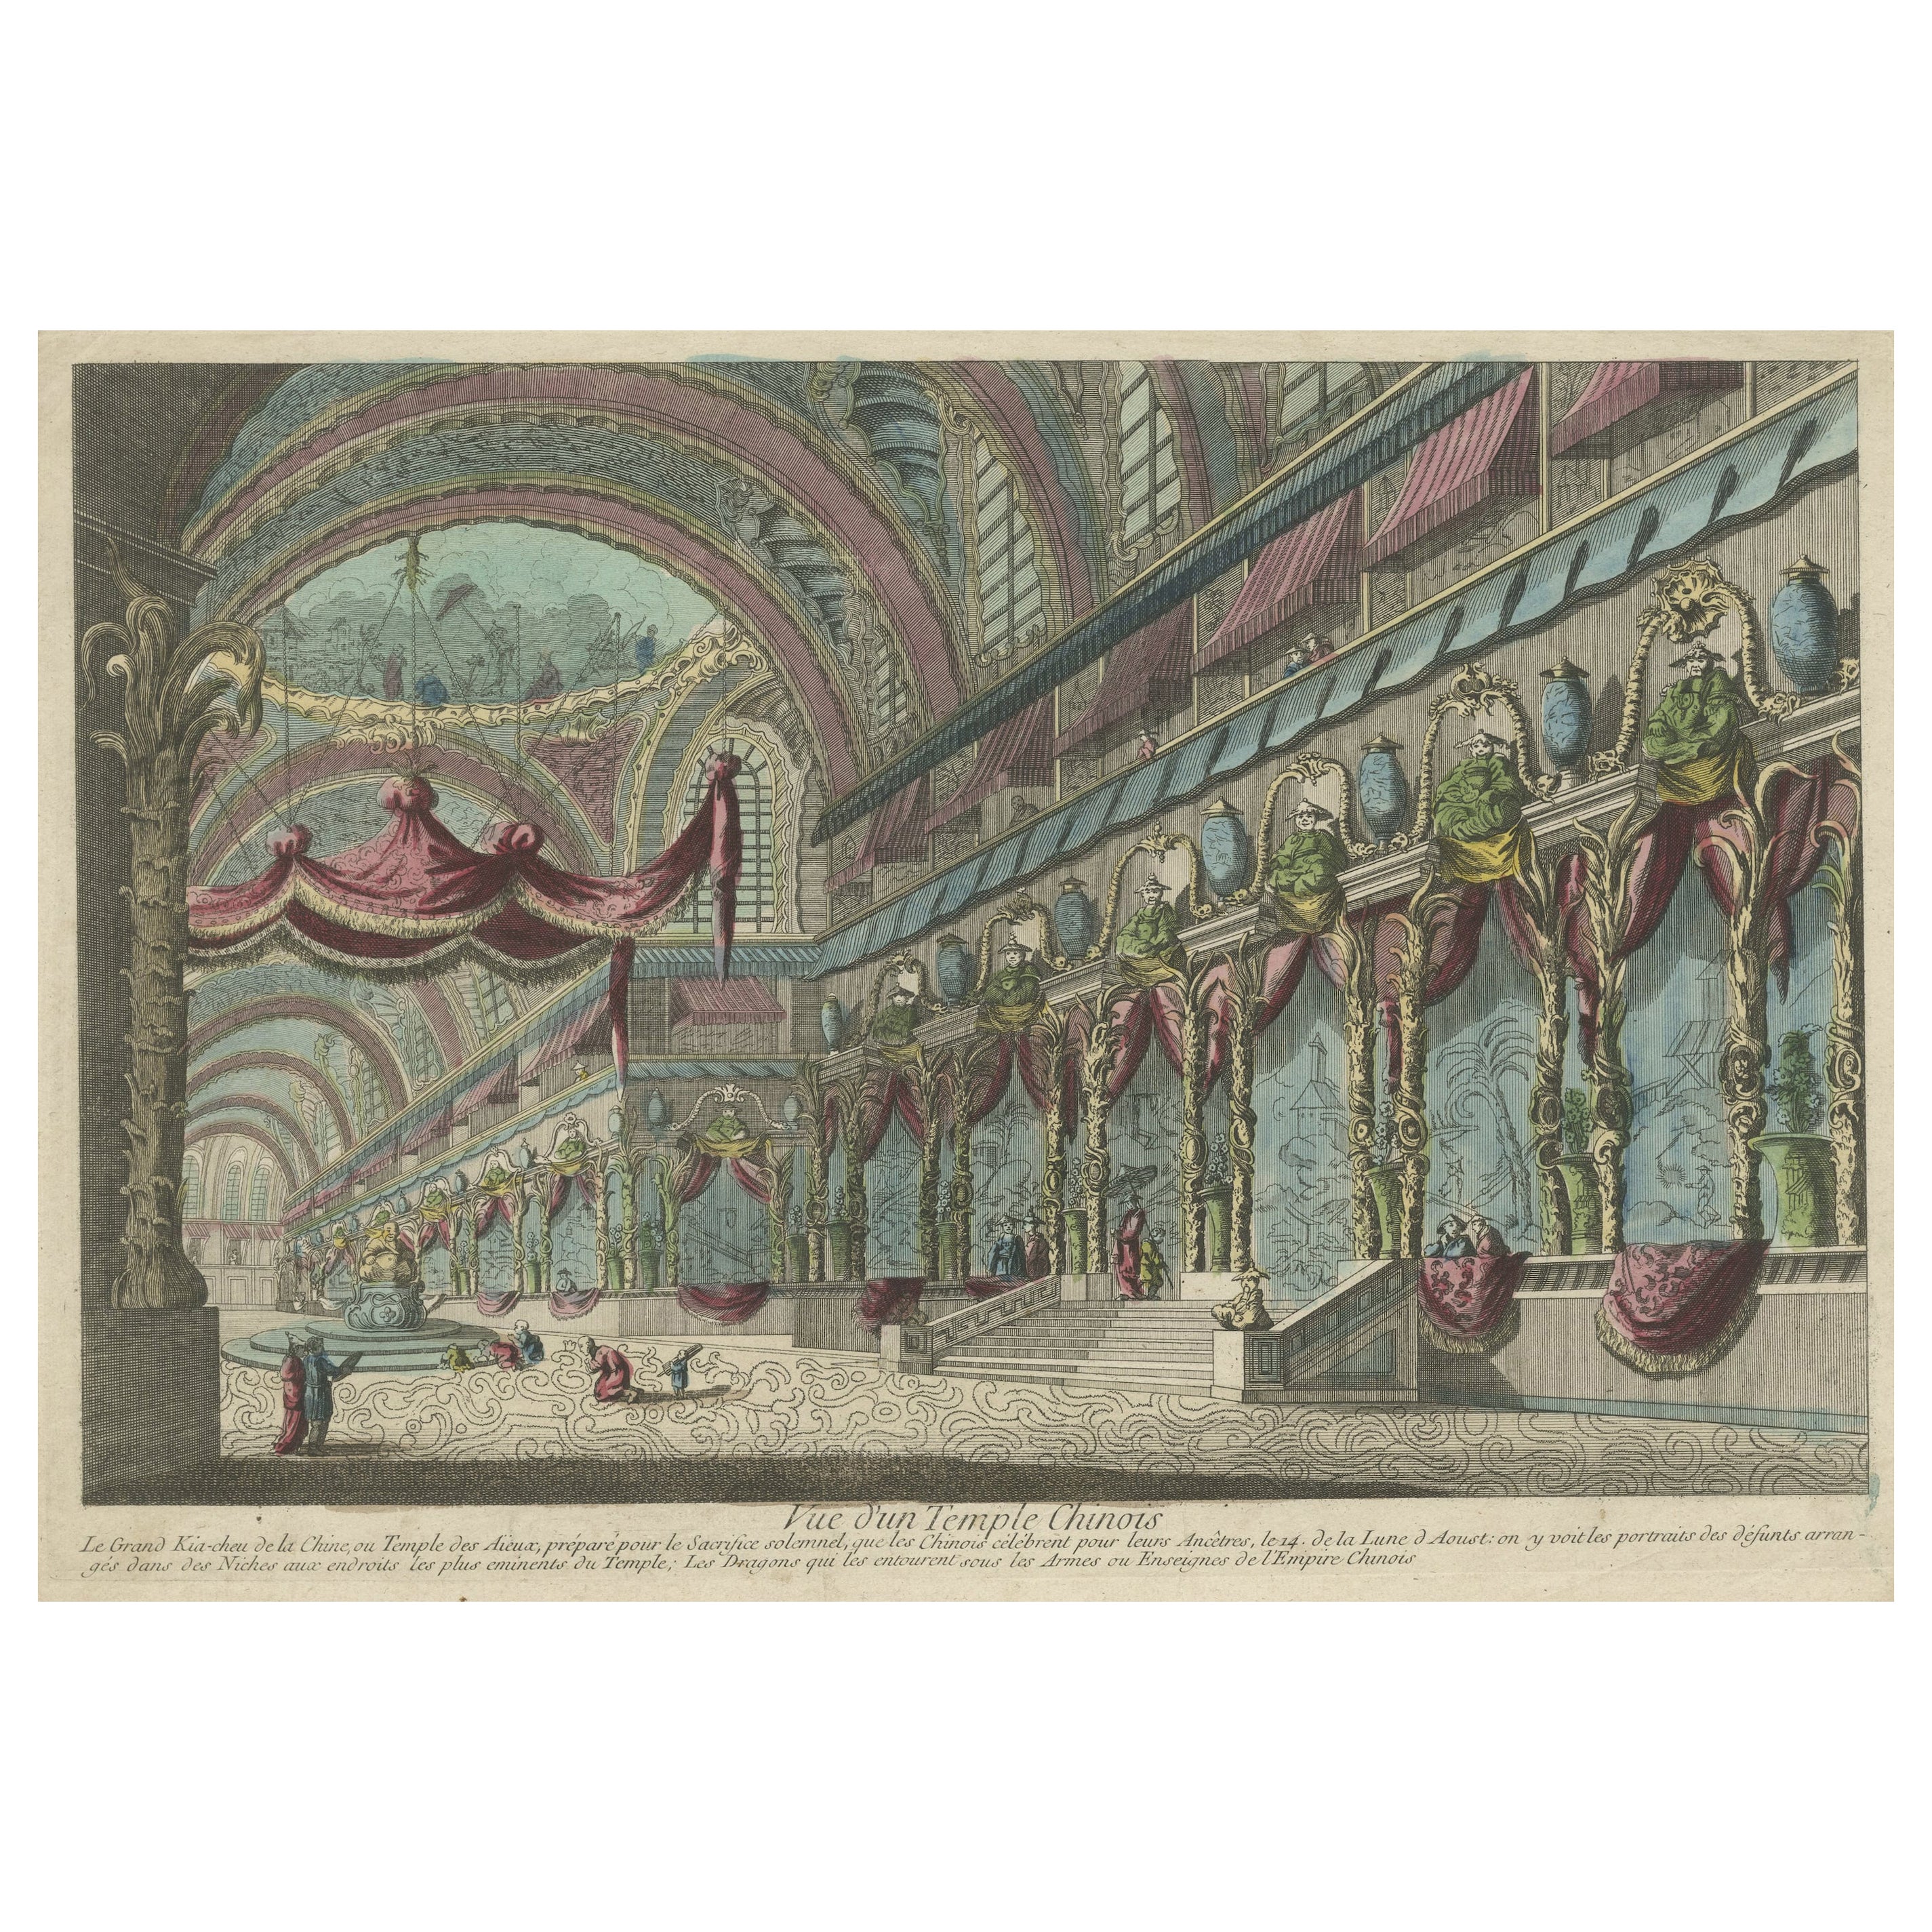 Handcolored Copperplate Engraving Showing a Perspective View of a Chinese Temple For Sale